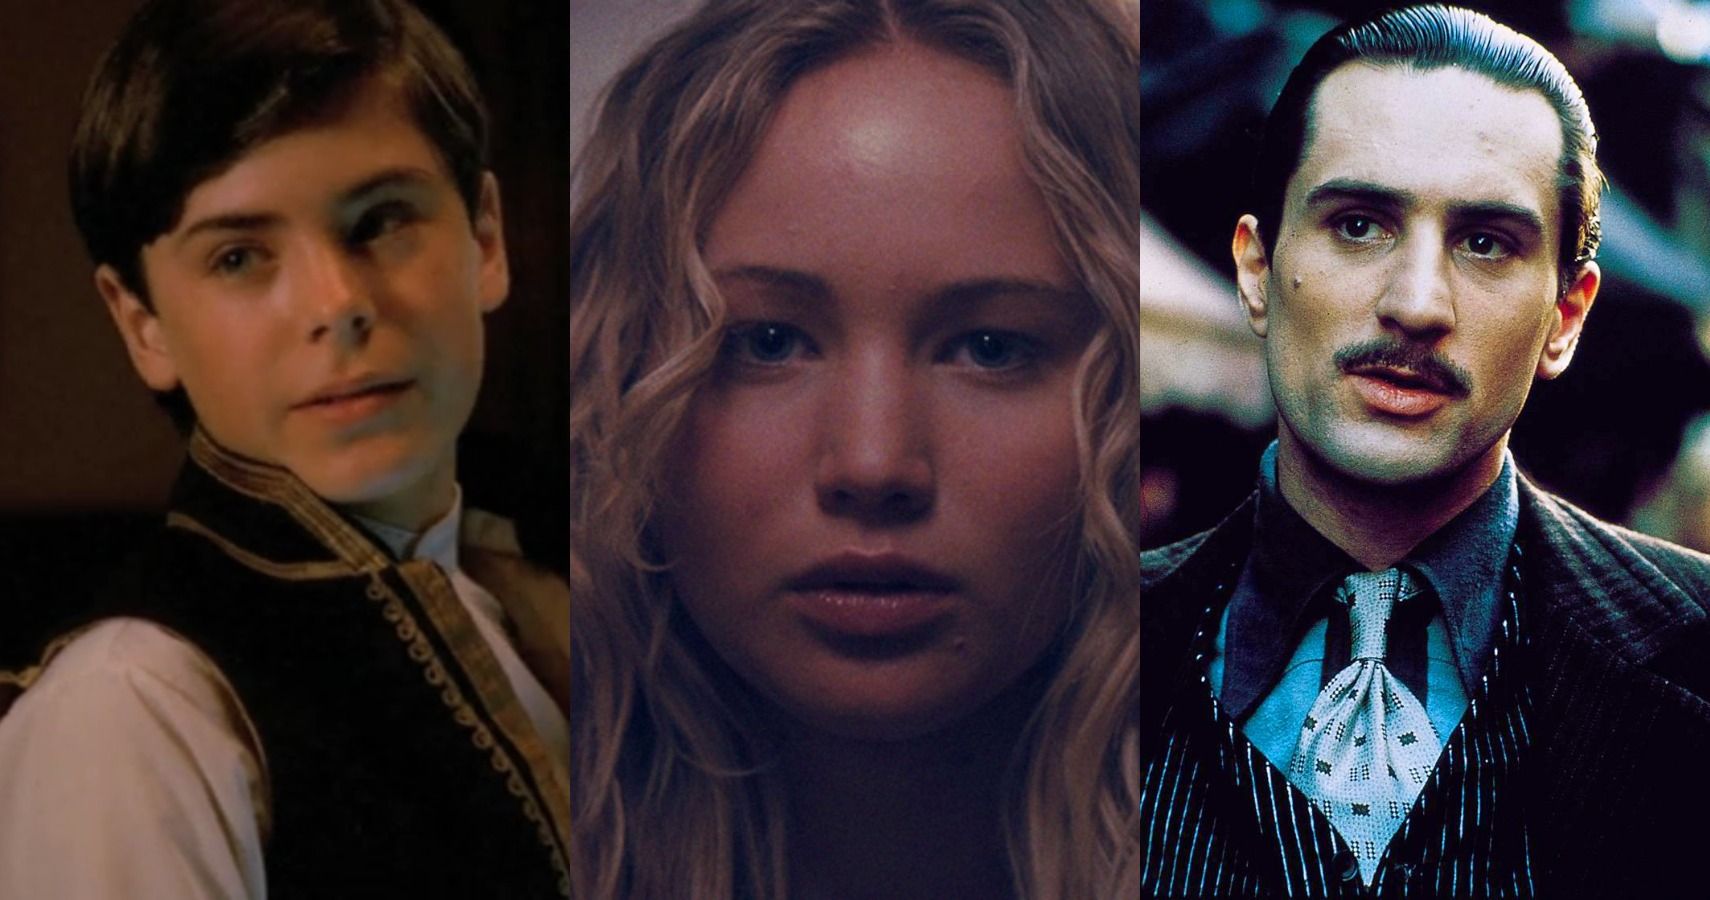 A combined image featuring a young Zac Efron on the left, a young Jennifer Lawrence in the middle, and a younger Robert De Niro on the right.